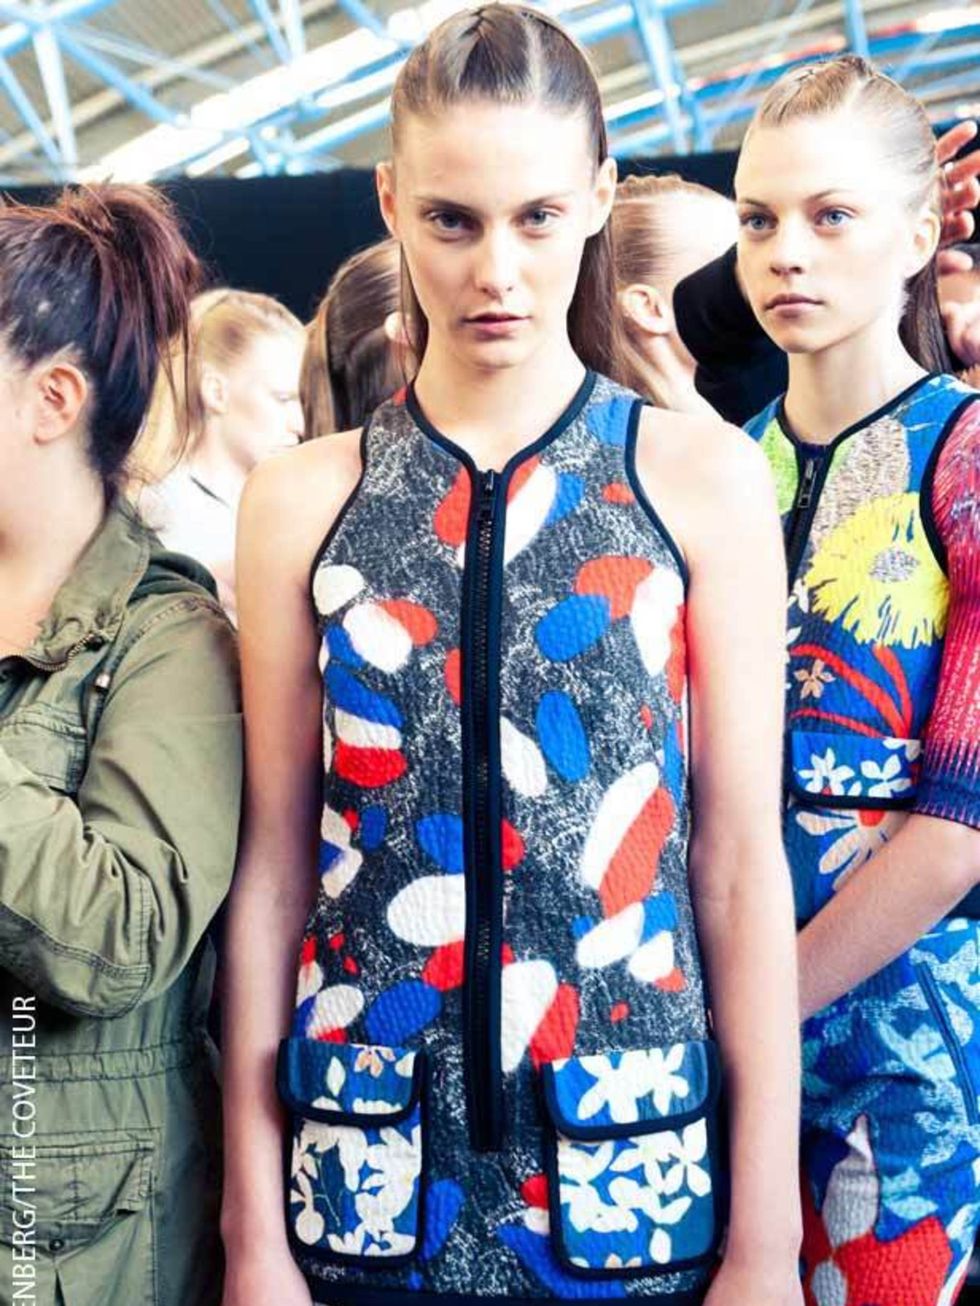 <p>Backstage at <a href="http://www.elleuk.com/catwalk/collections/peter-pilotto/">Peter Pilottos S/S 12 show</a></p>